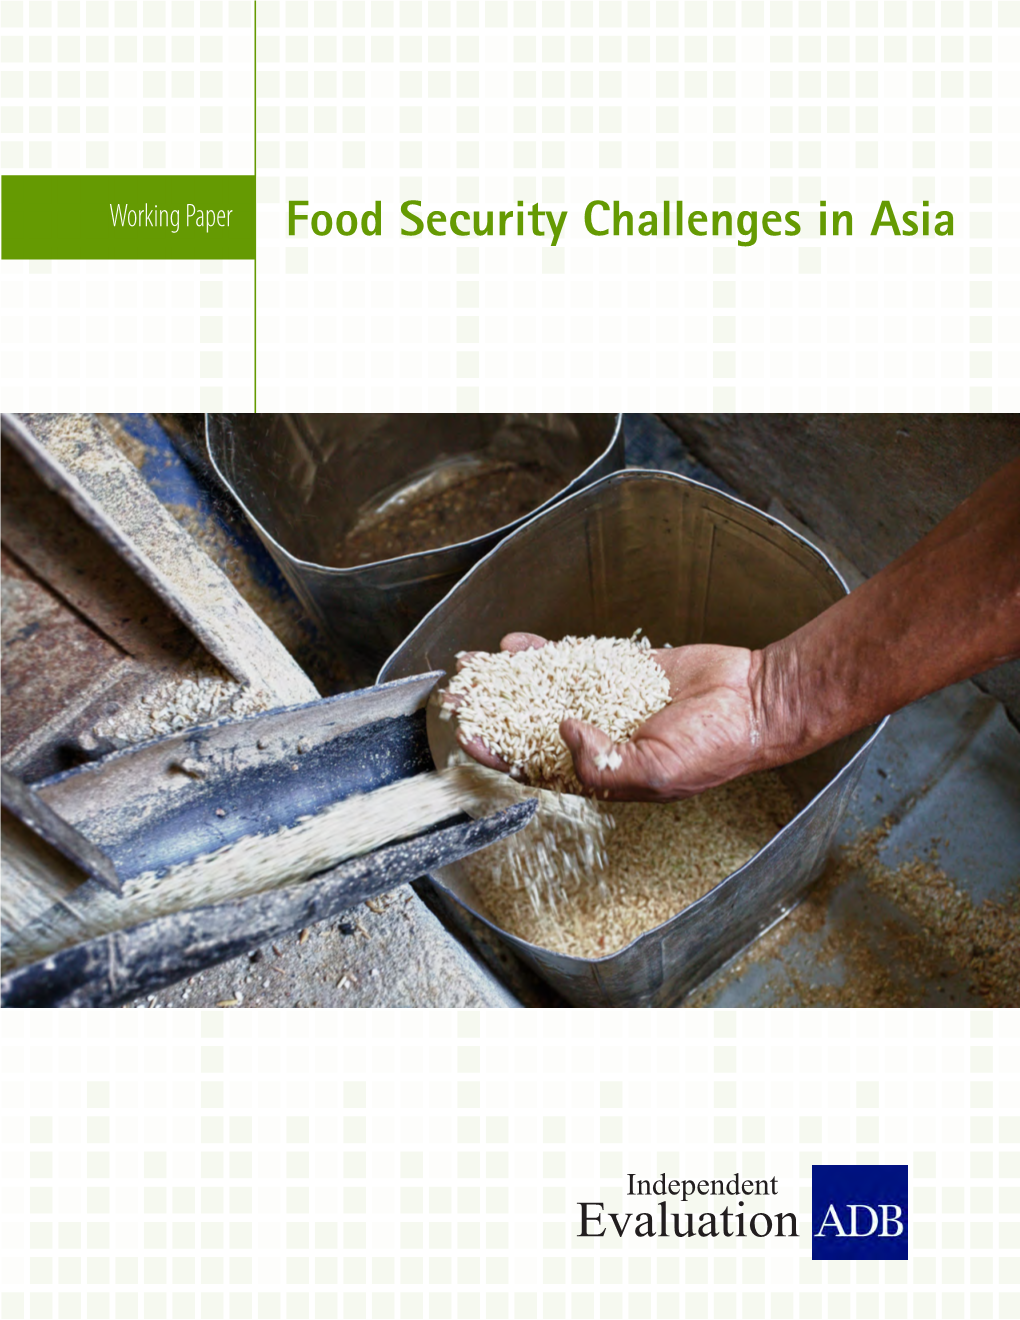 Food Security Challenges in Asia Evaluation